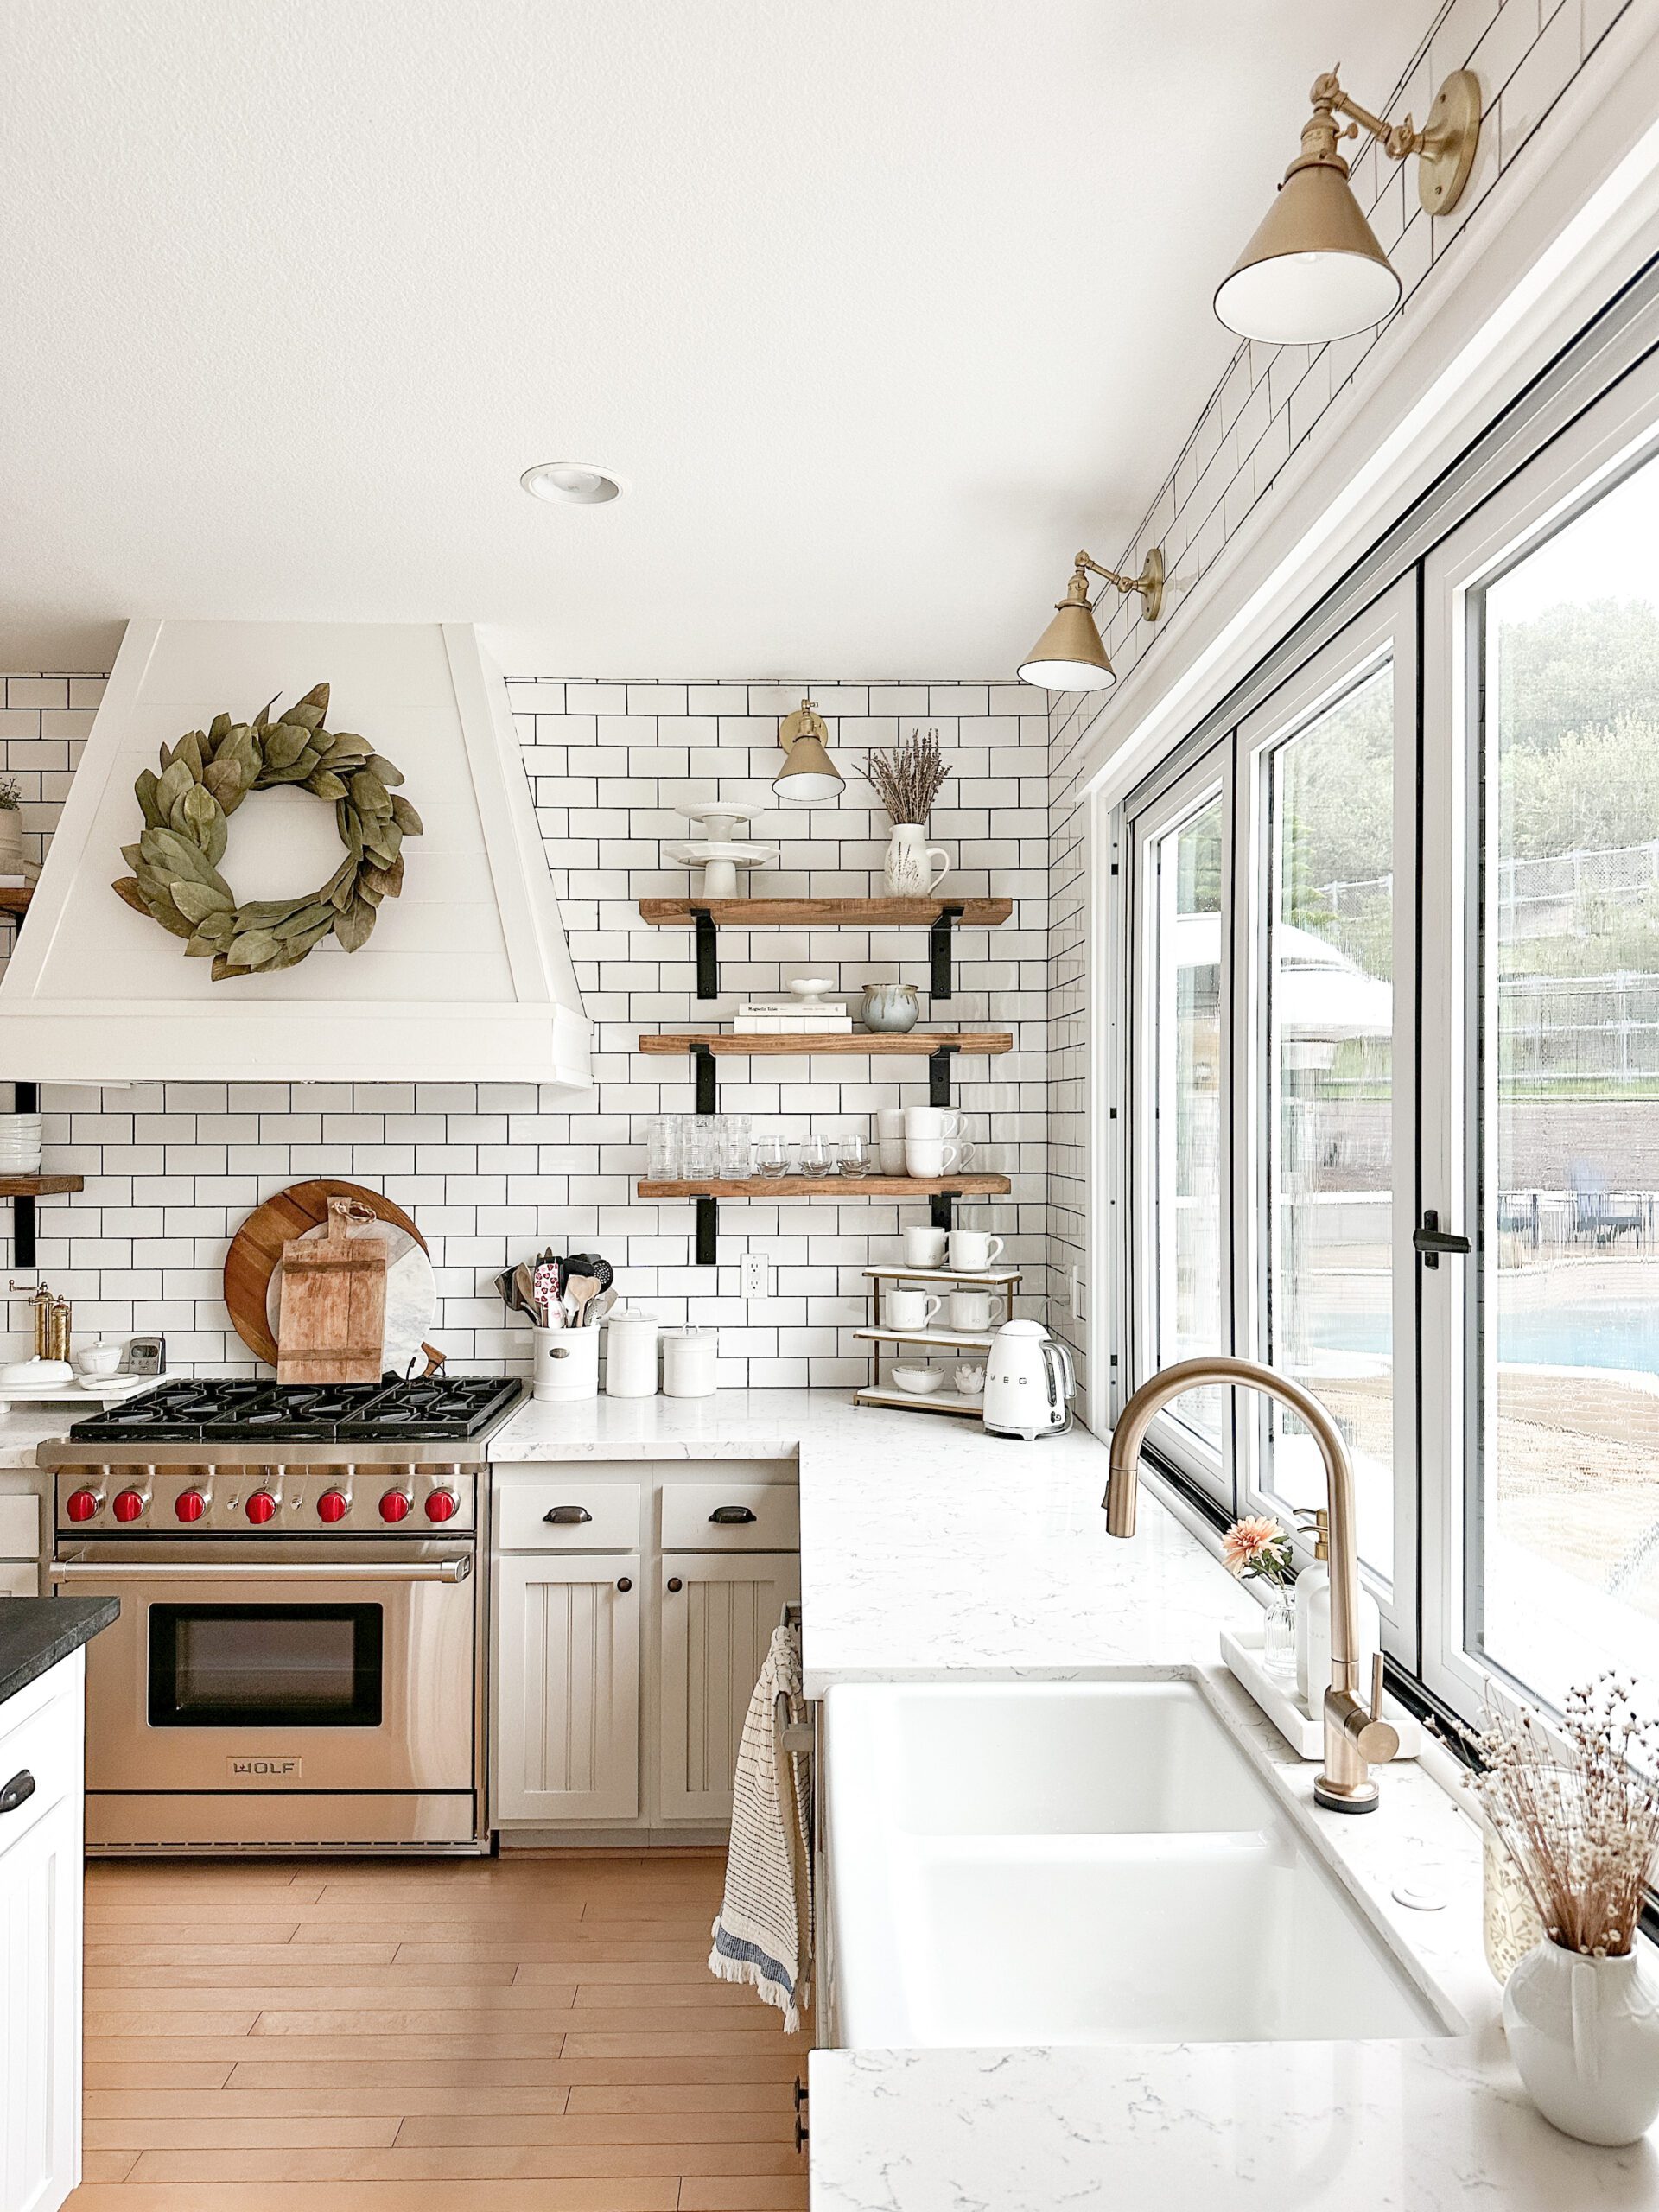 How To Mix And Match Stainless Steel Kitchen Shelves With Your Style